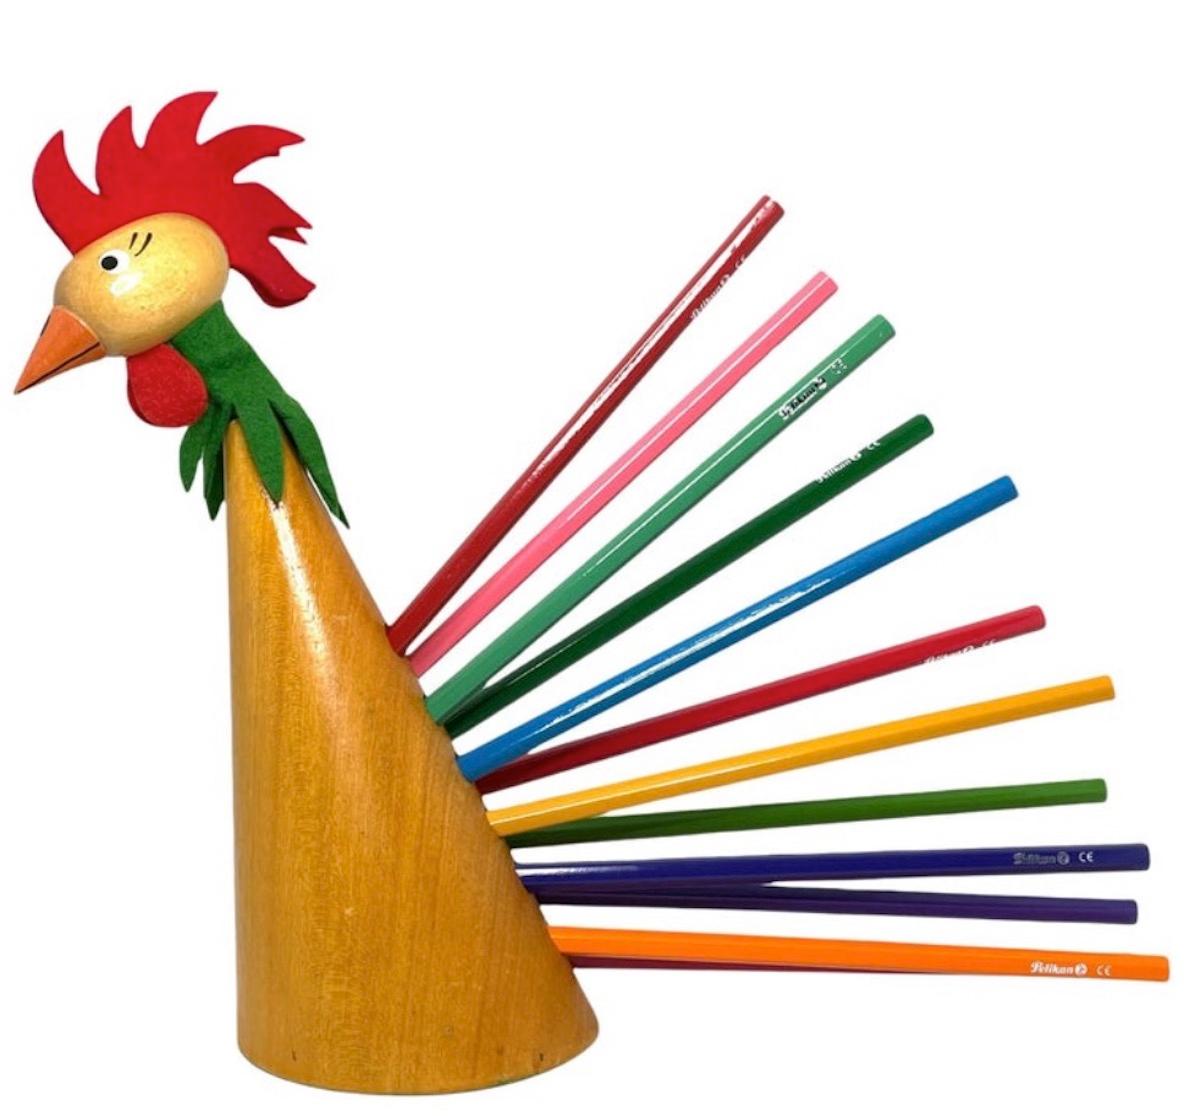 Classic early 1960s Danish design wood rooster sculpture as a pencil holder. Nice addition to your table or just for your collection of design items. Made of wood, metal and felting. Found at an estate sale in Nuremberg, Germany . Pencils shown in